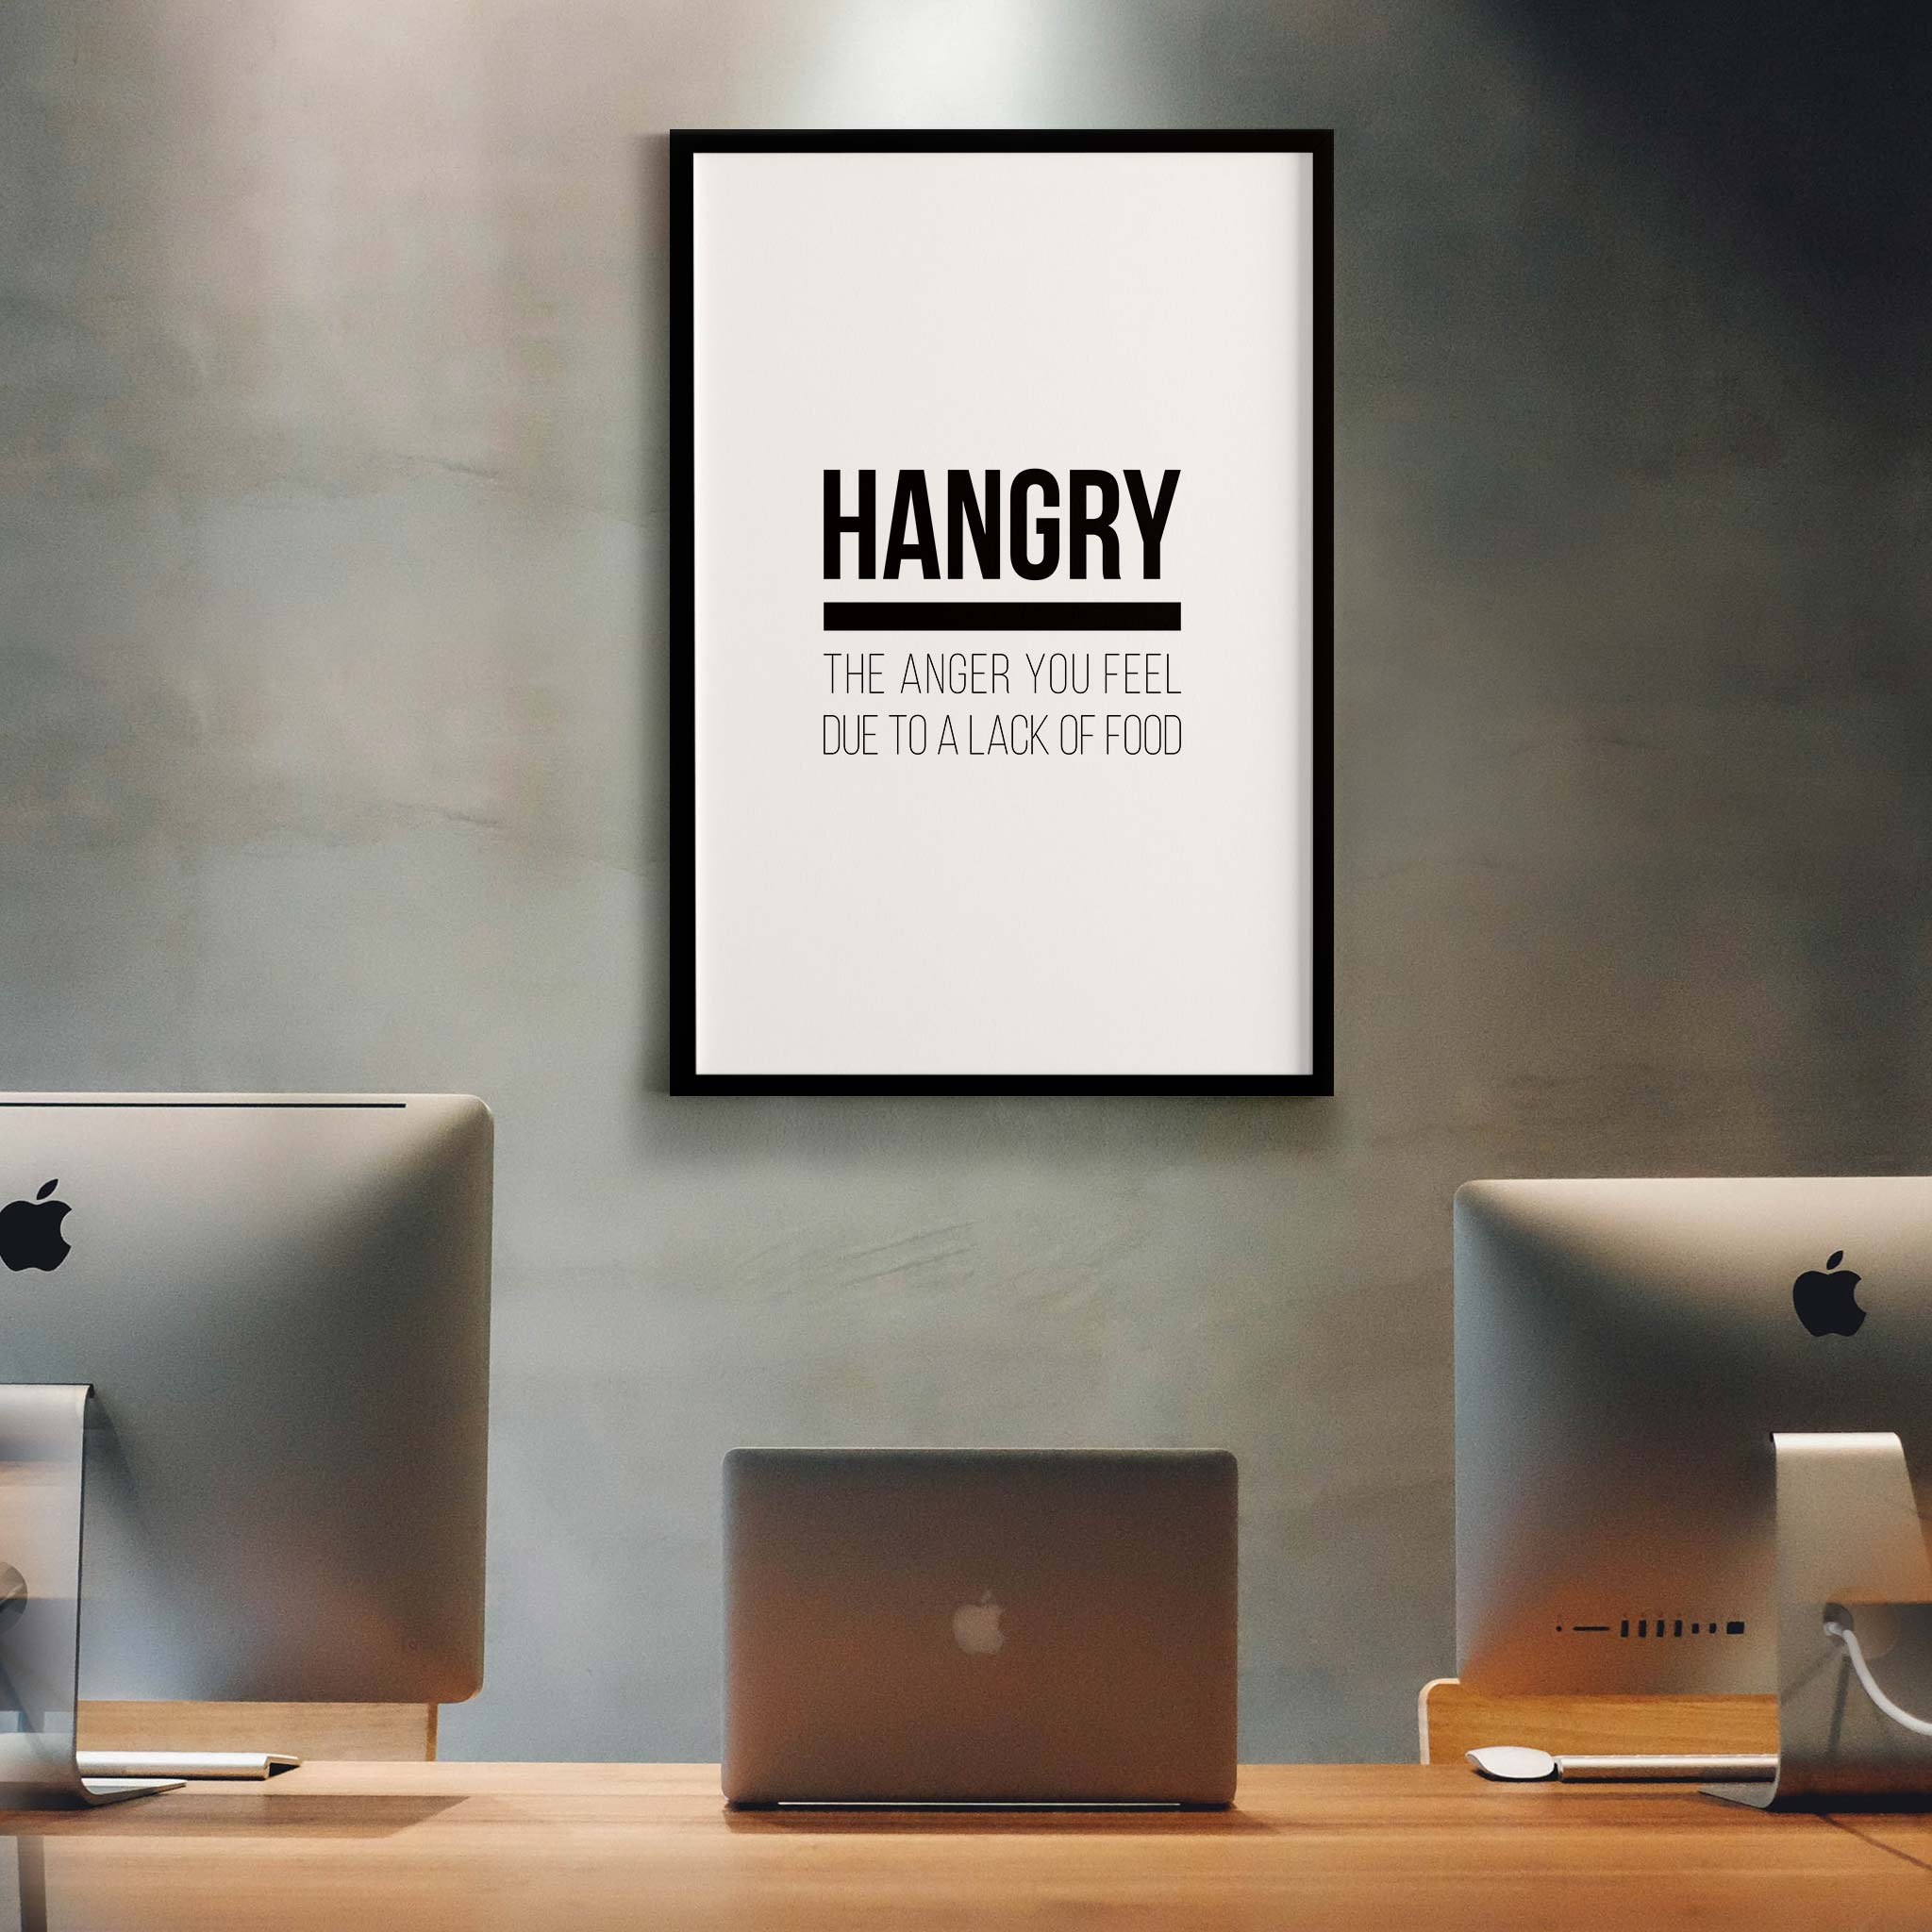 Hangry - the anger you feel due to a lack of food